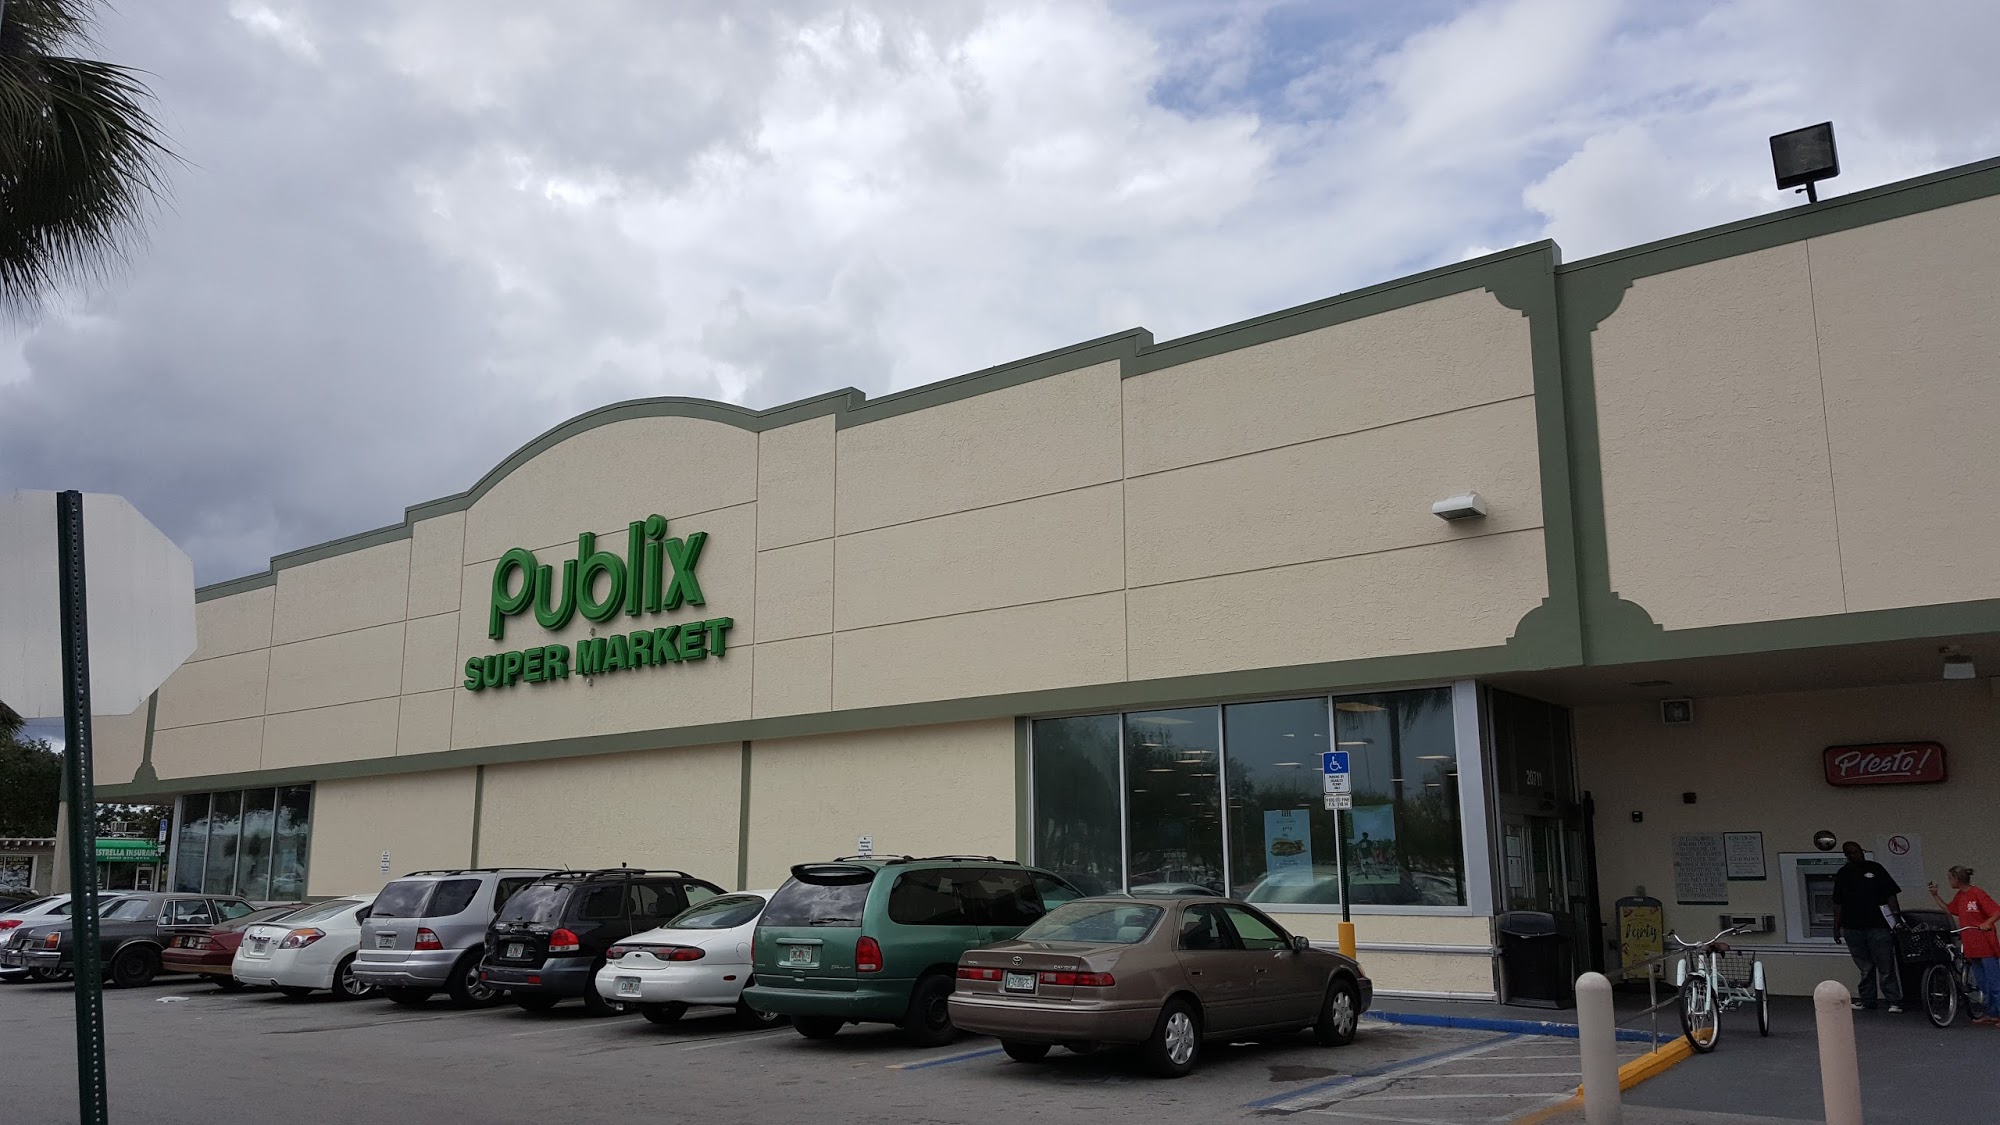 Publix Super Market at Allapattah and US 1 Shopping Center